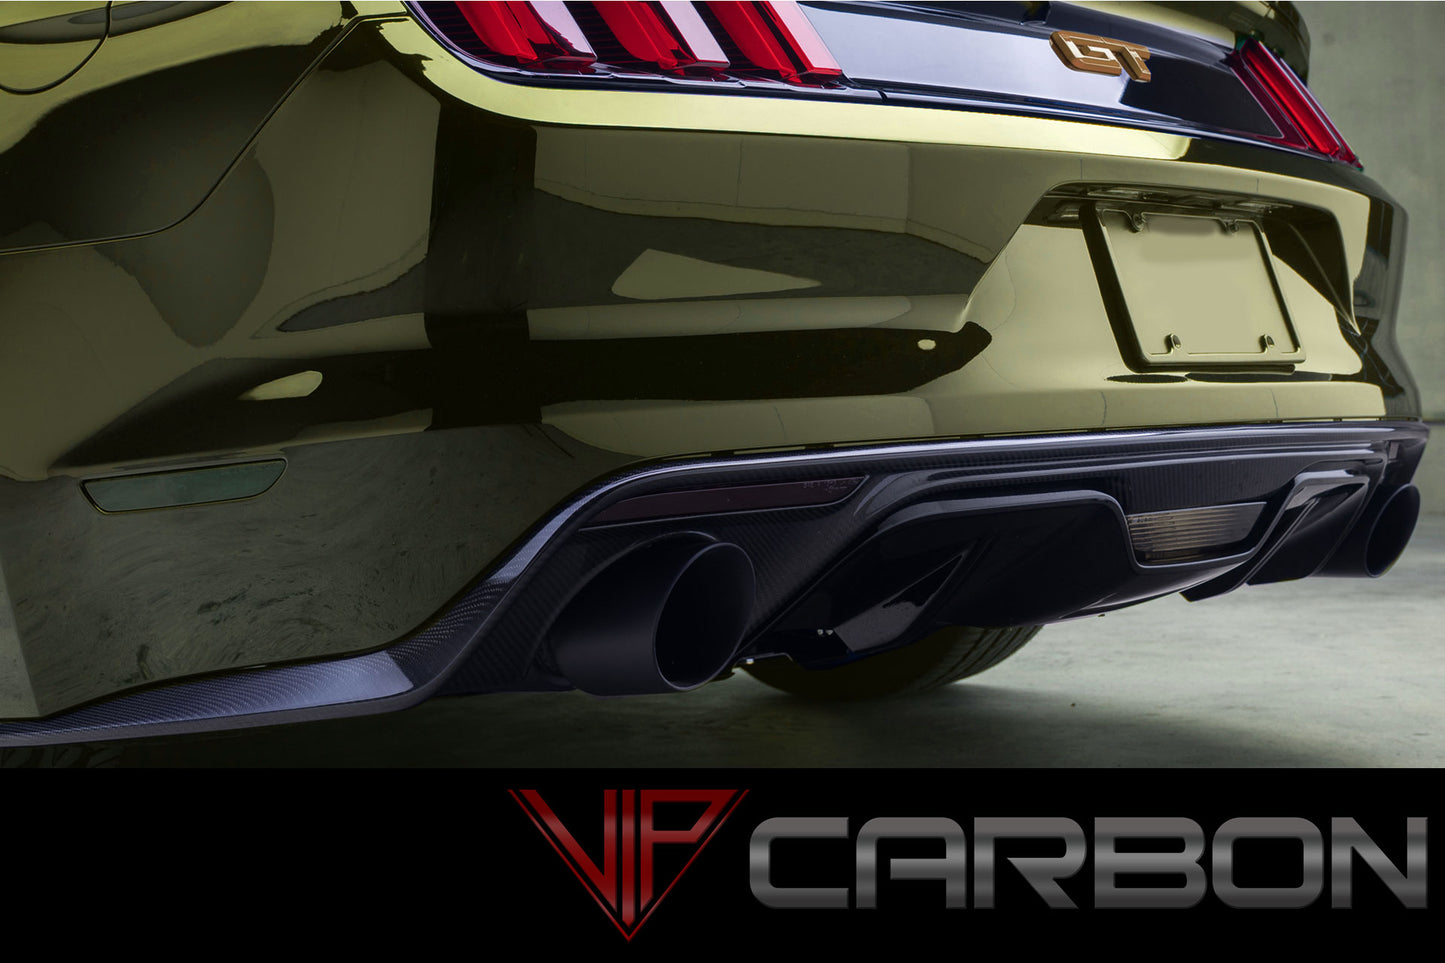 Carbon Fiber GT Rear Diffuser Ford Mustang 2015-2018 by VIP